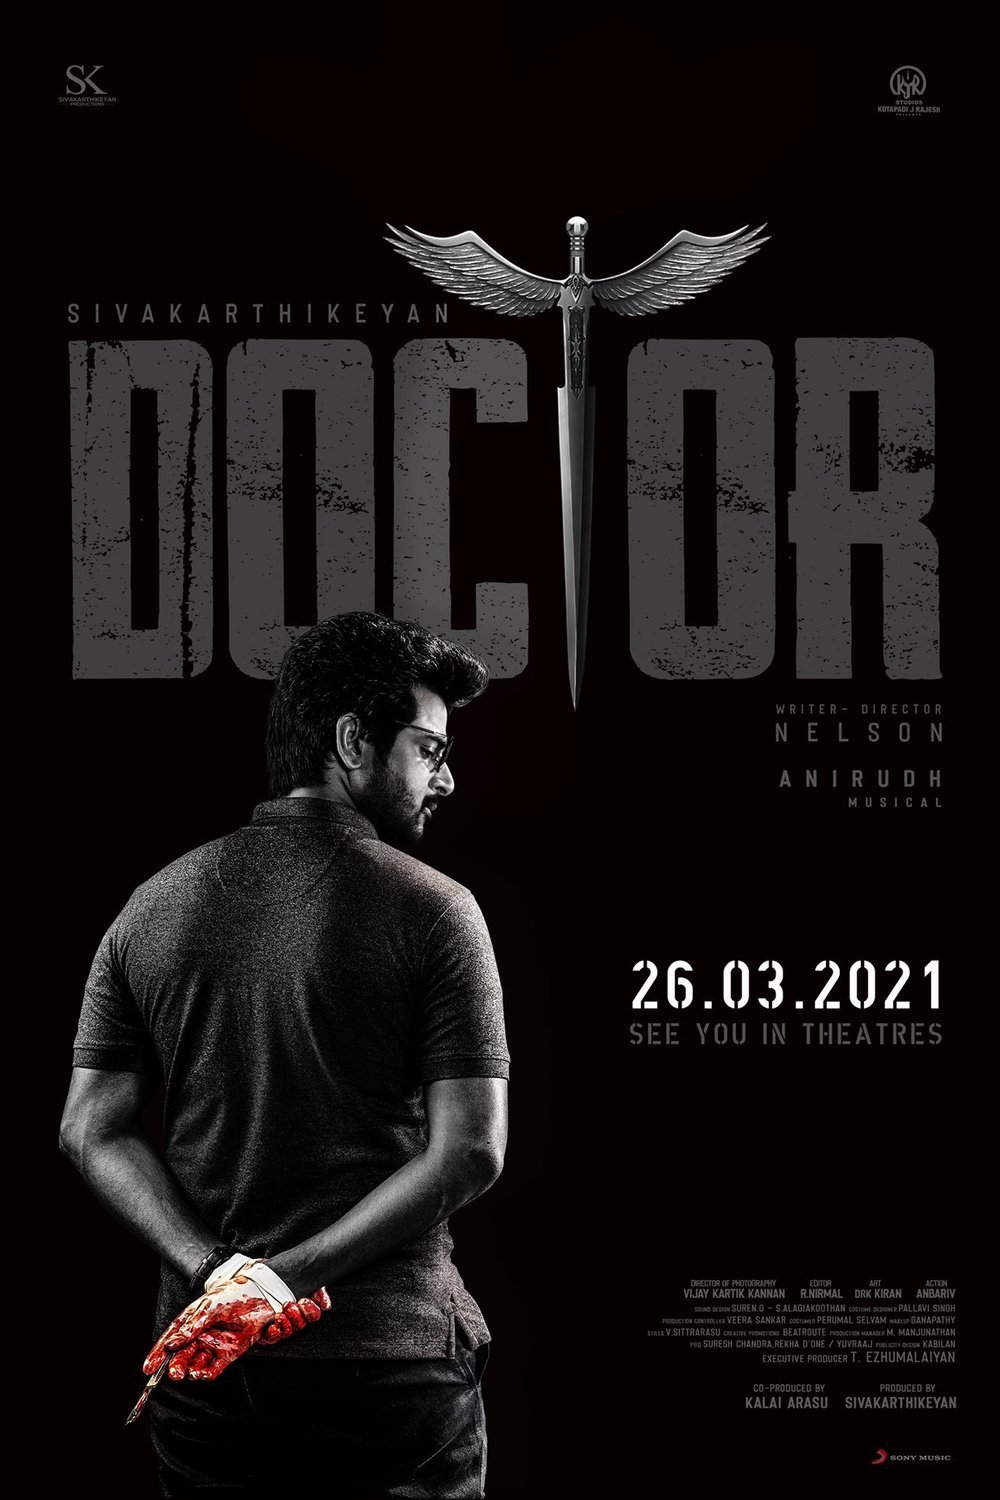 Tamil poster of the movie Doctor